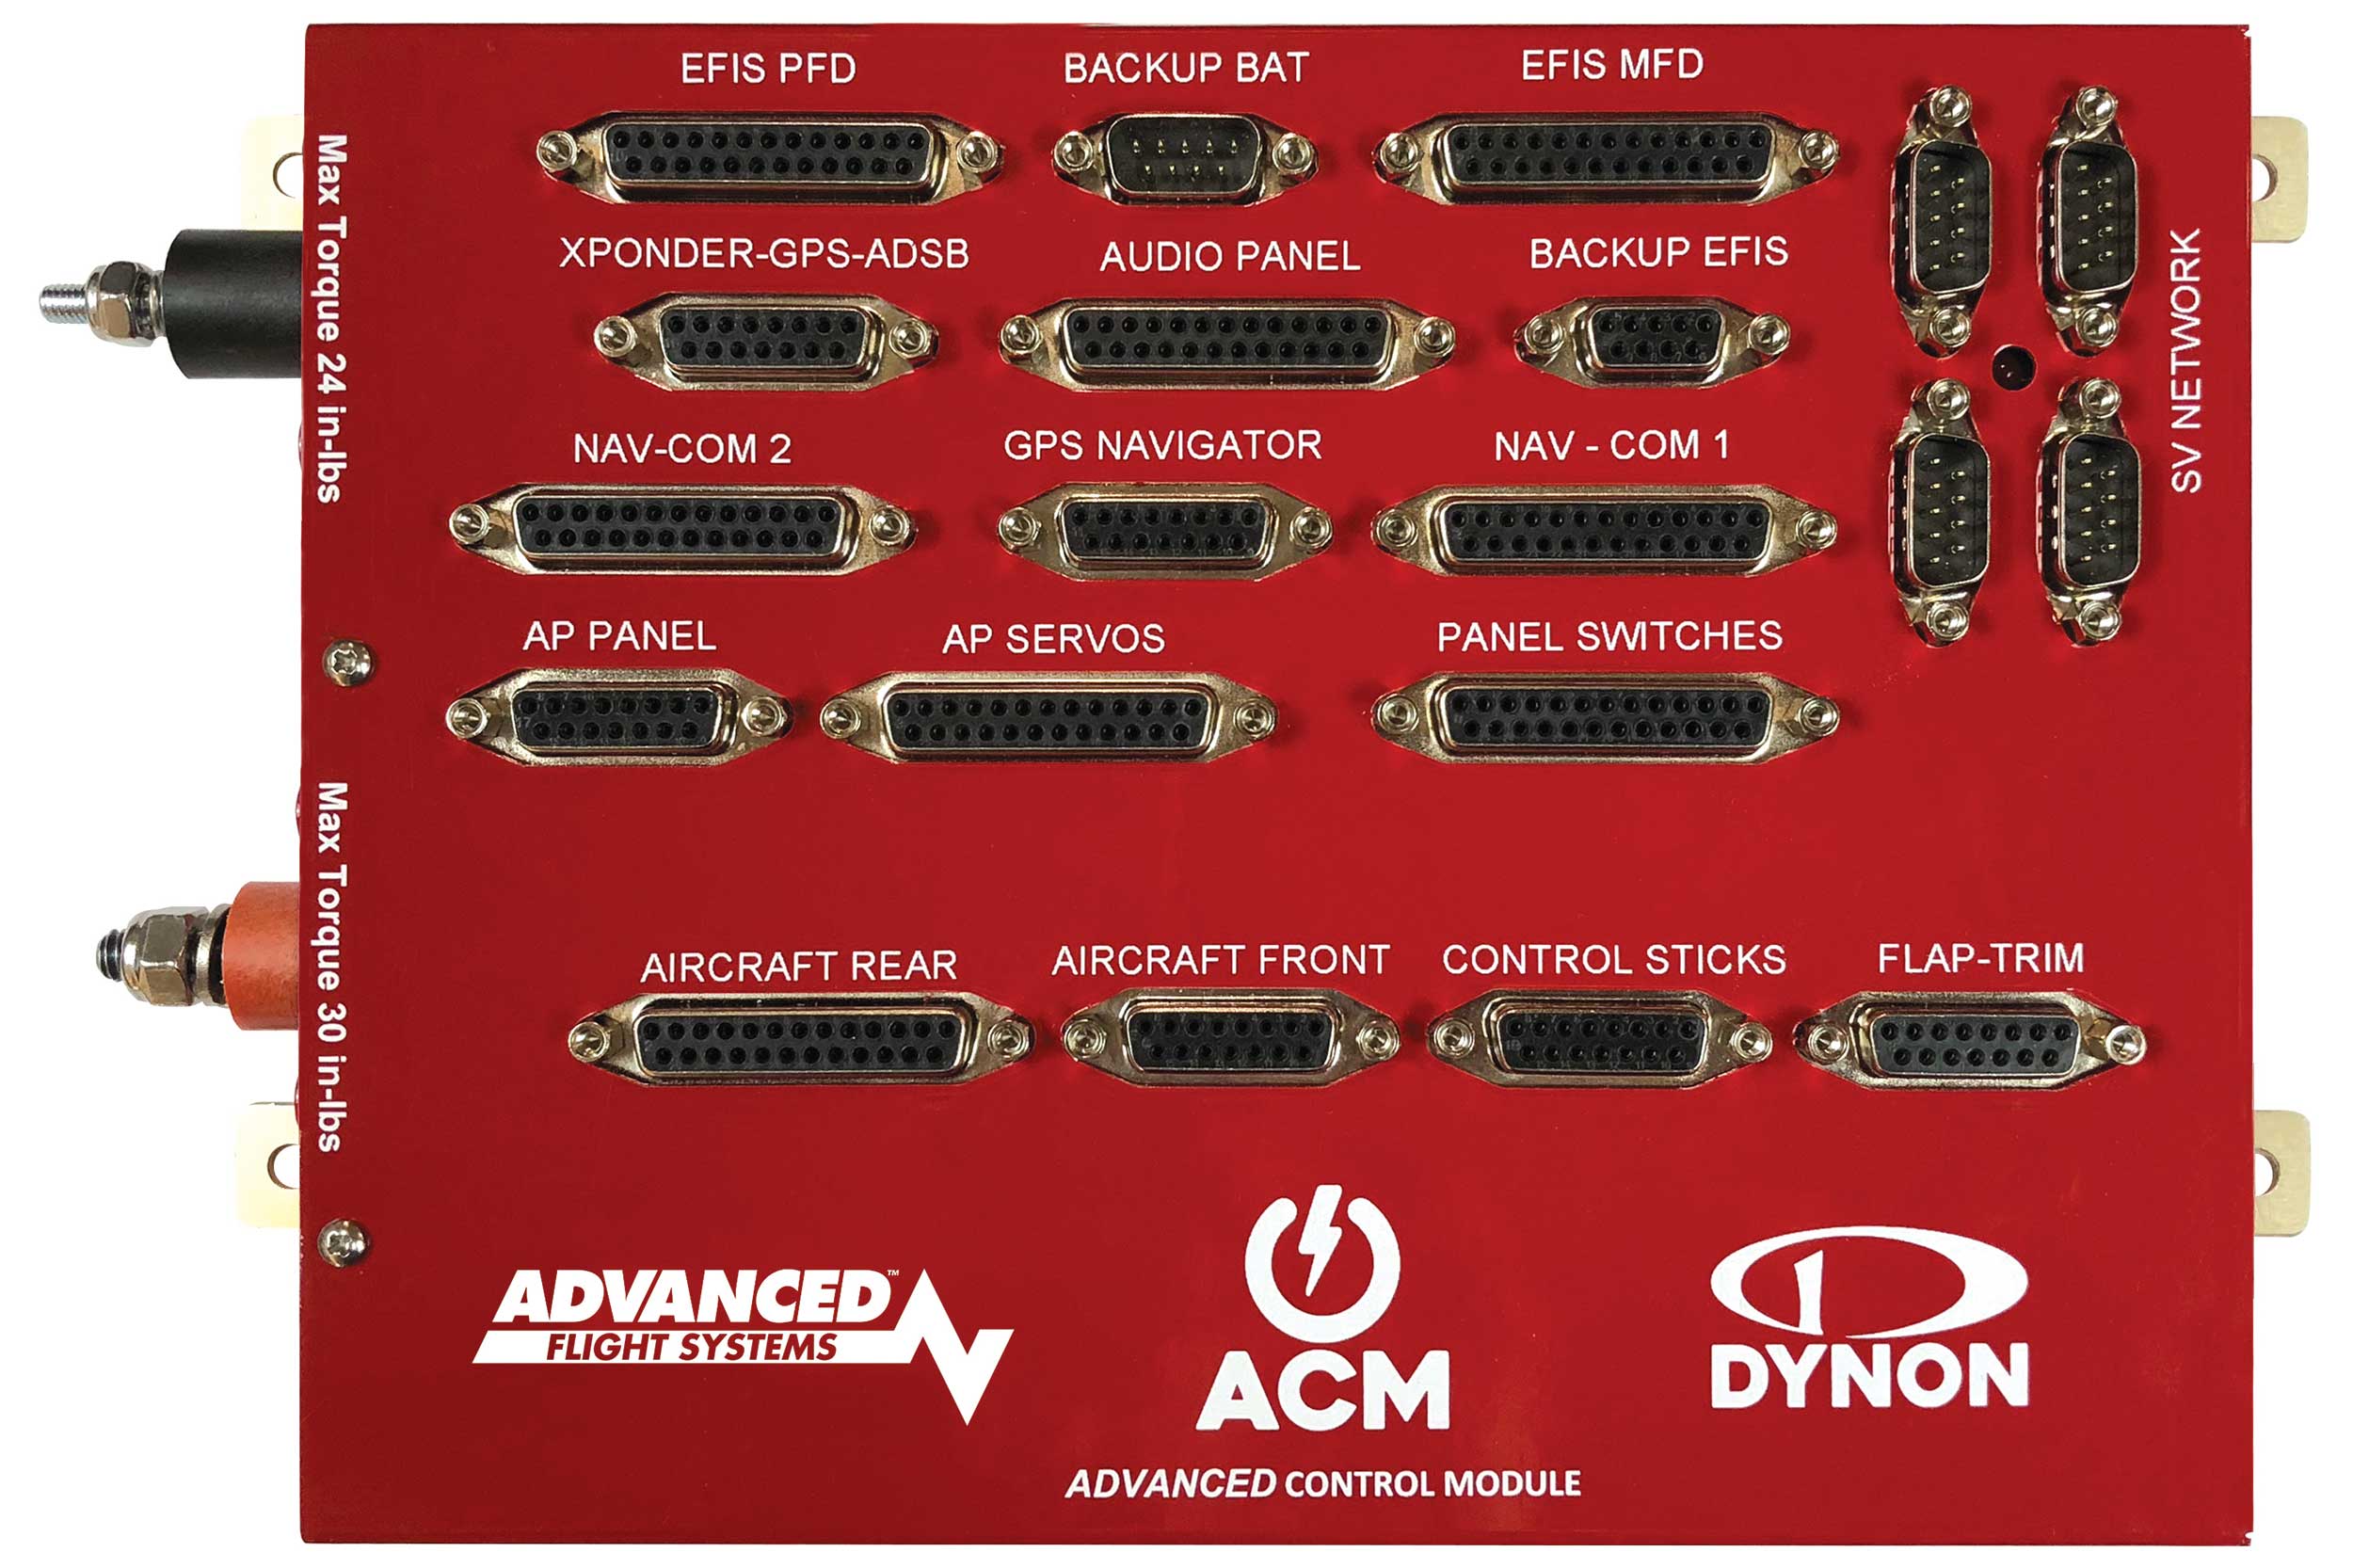 The Advanced Control Module integrates and automates a wide range of common aircraft avionics, wiring, and electrical peripherals 